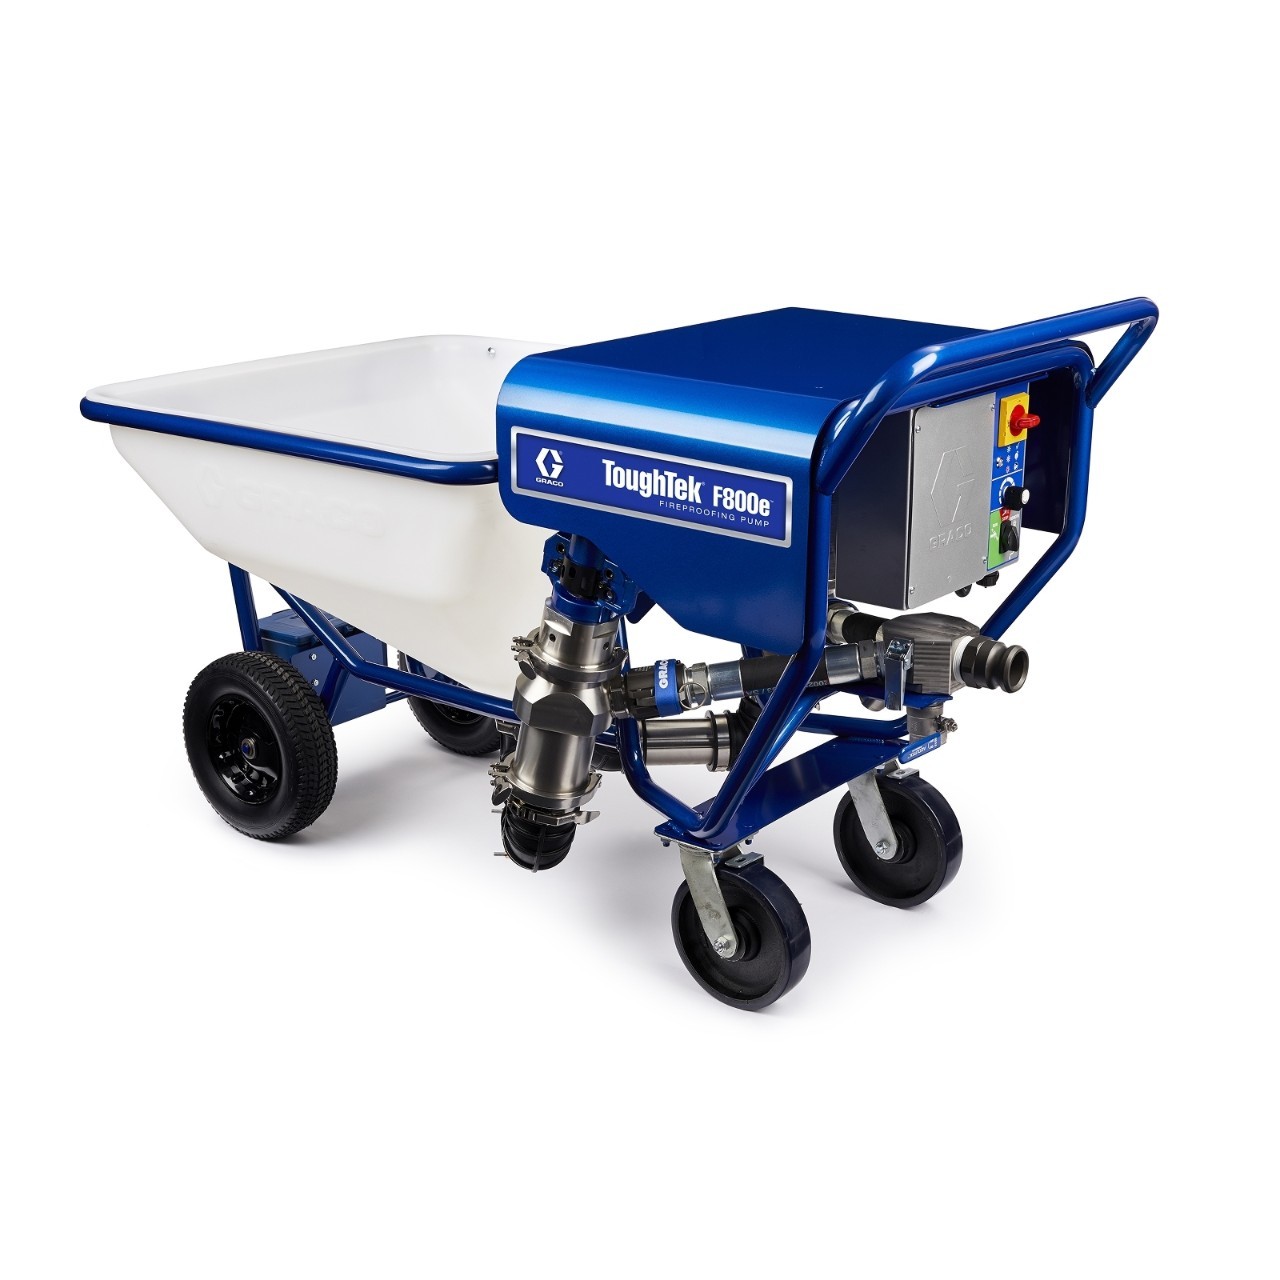 Graco Fireproofing Machines